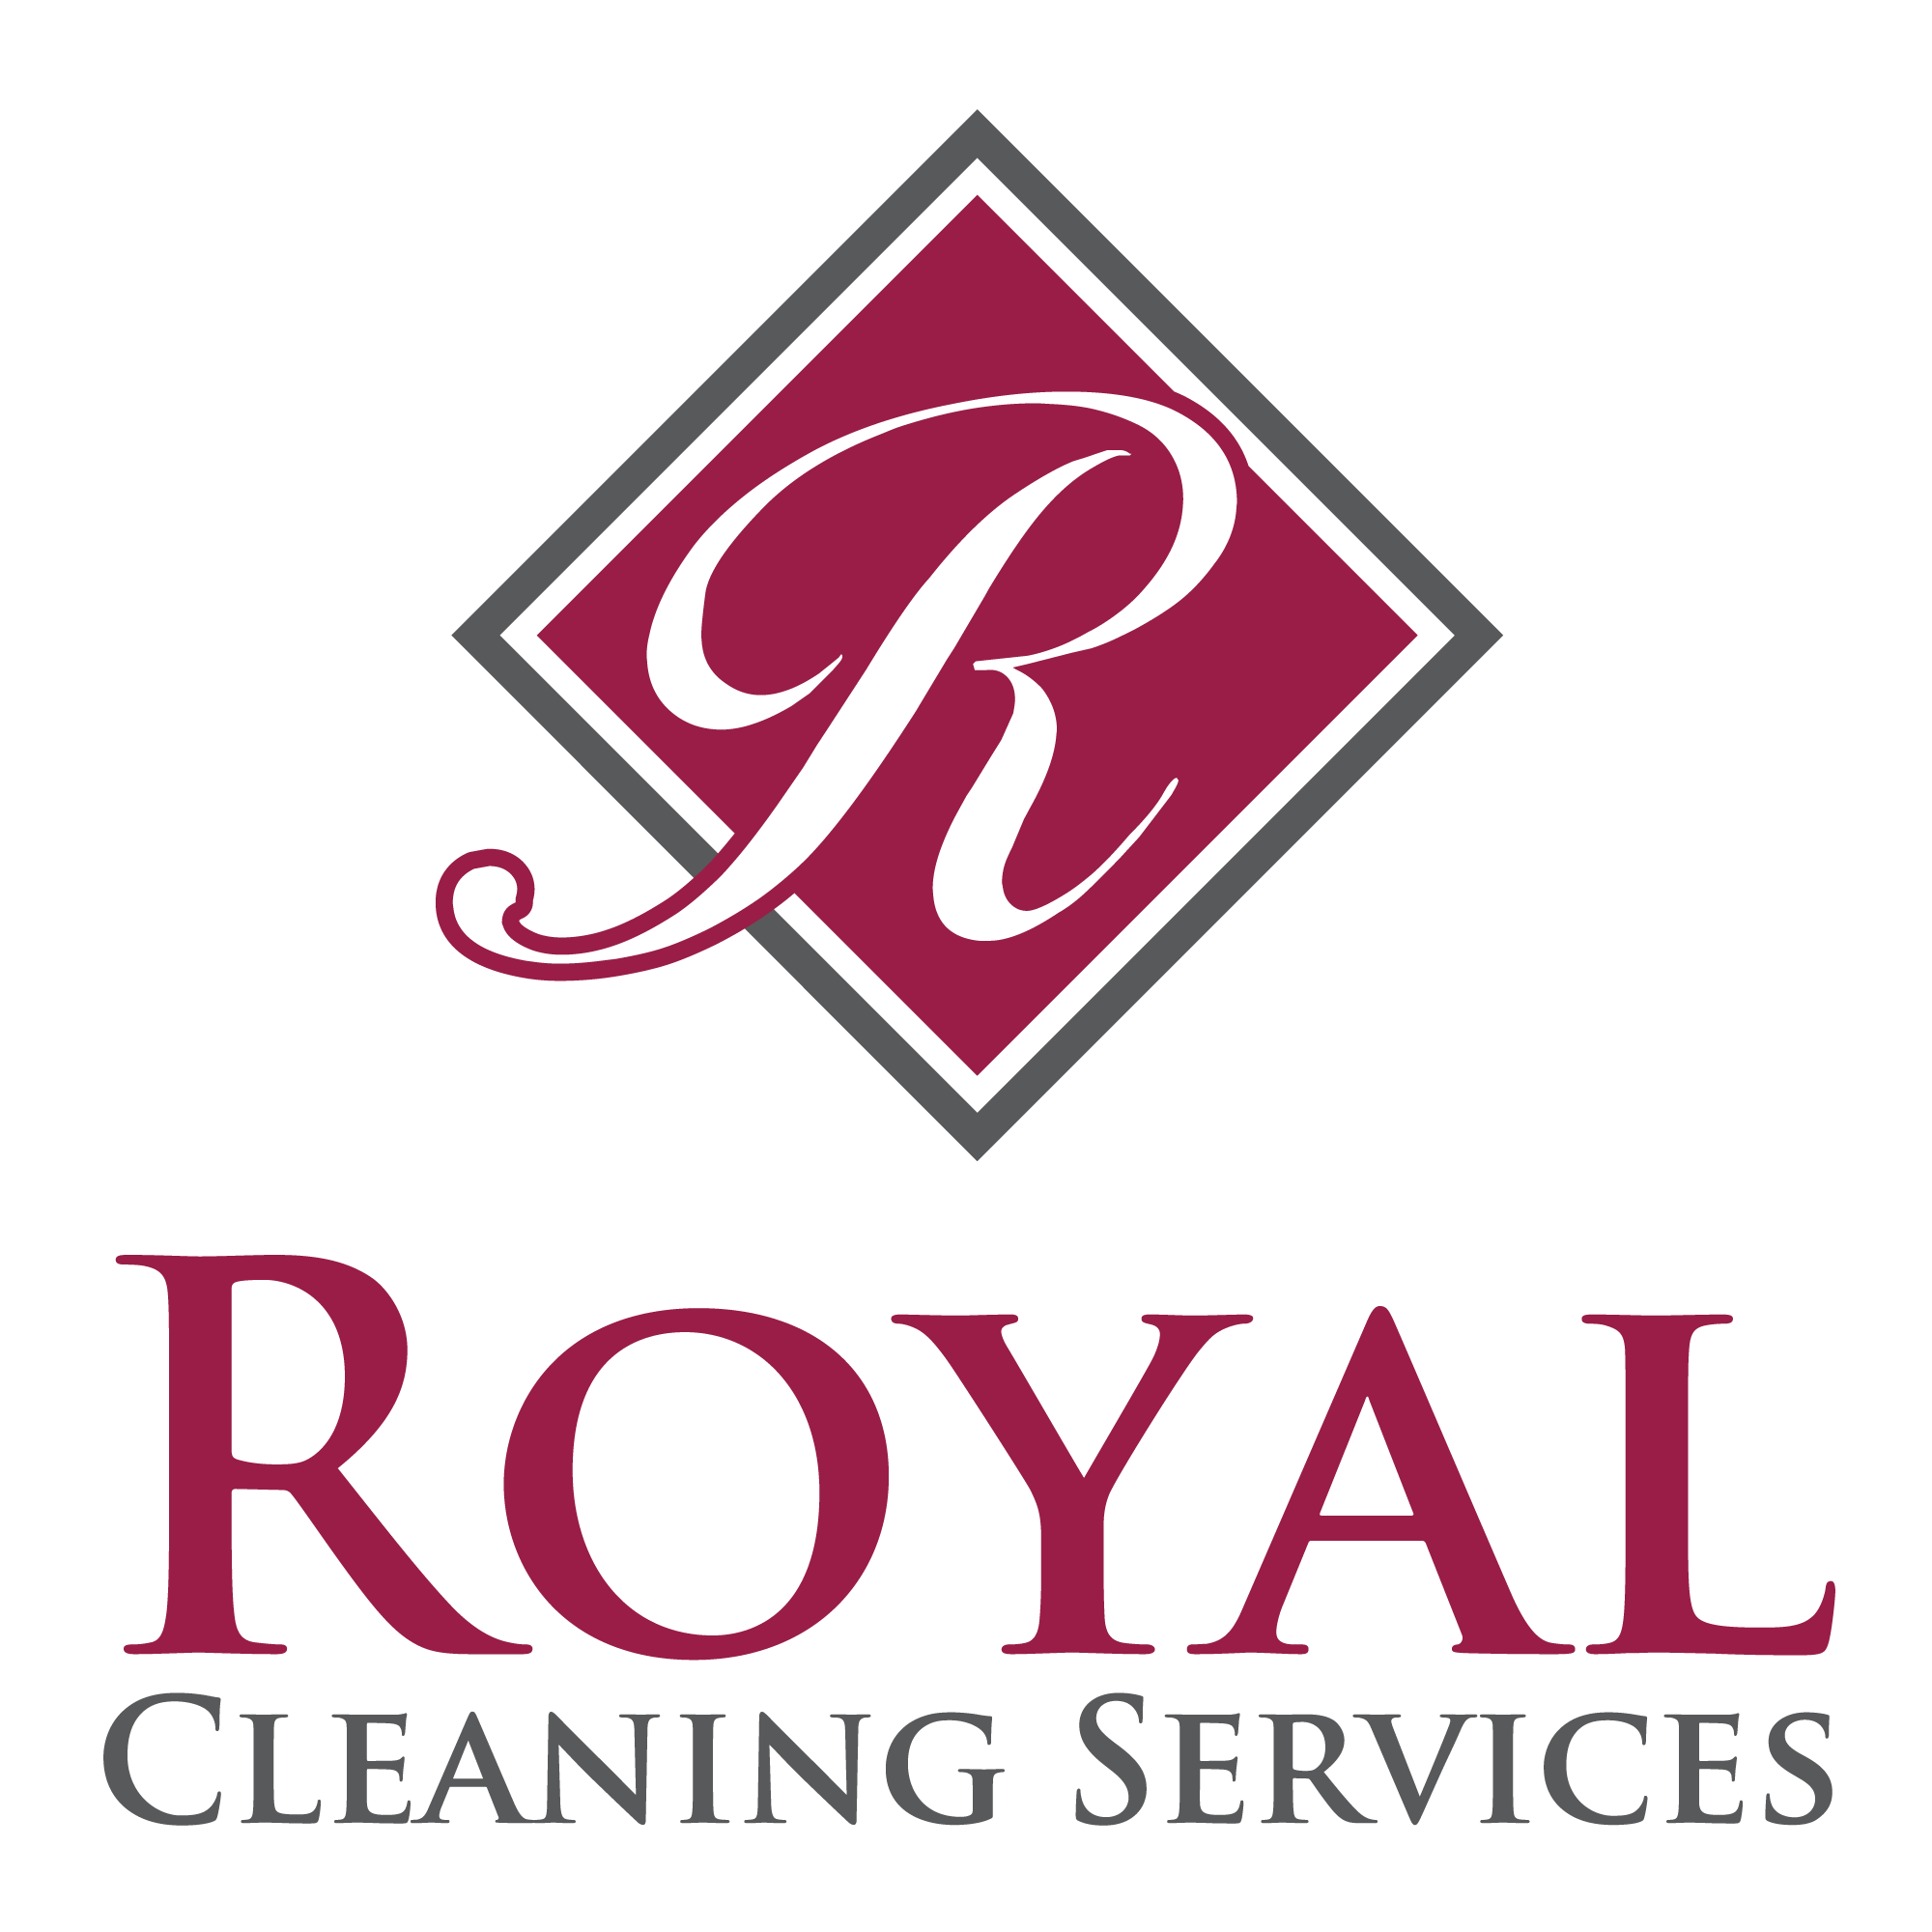 Royal Cleaning Services Logo